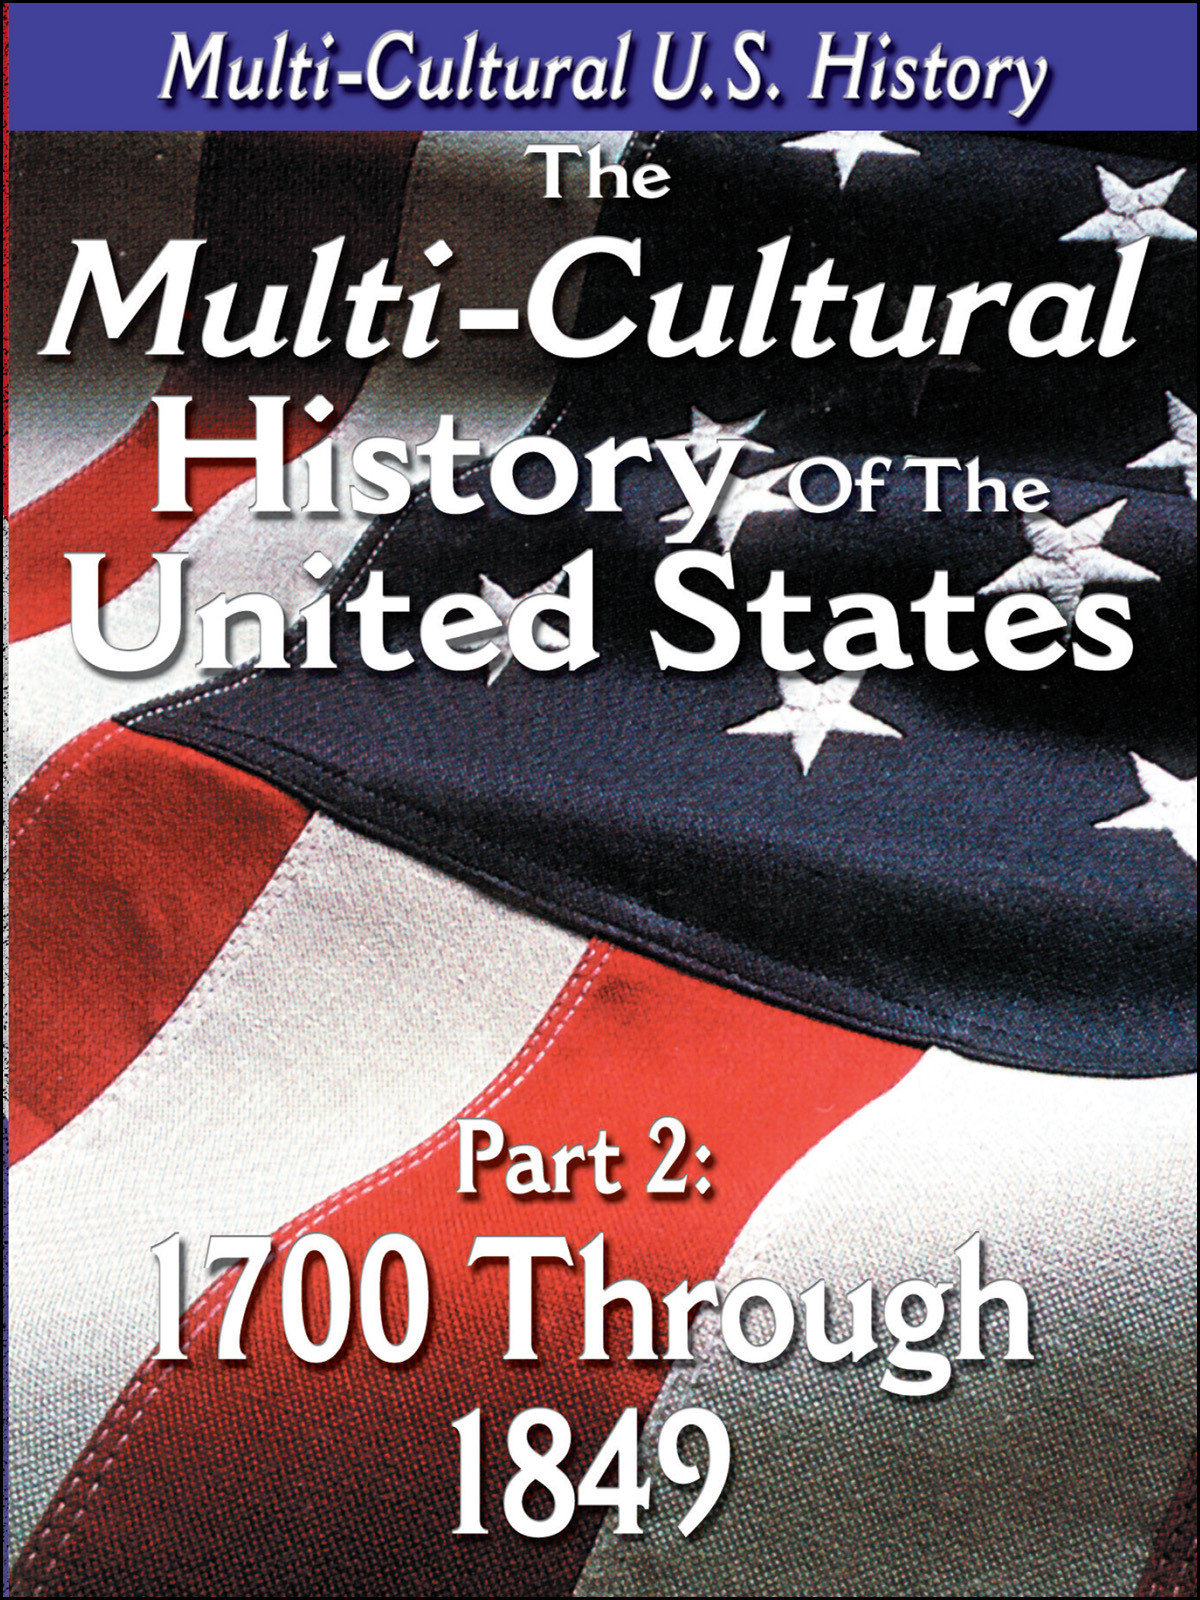 L918 - The History of the United States 1700 through 1849